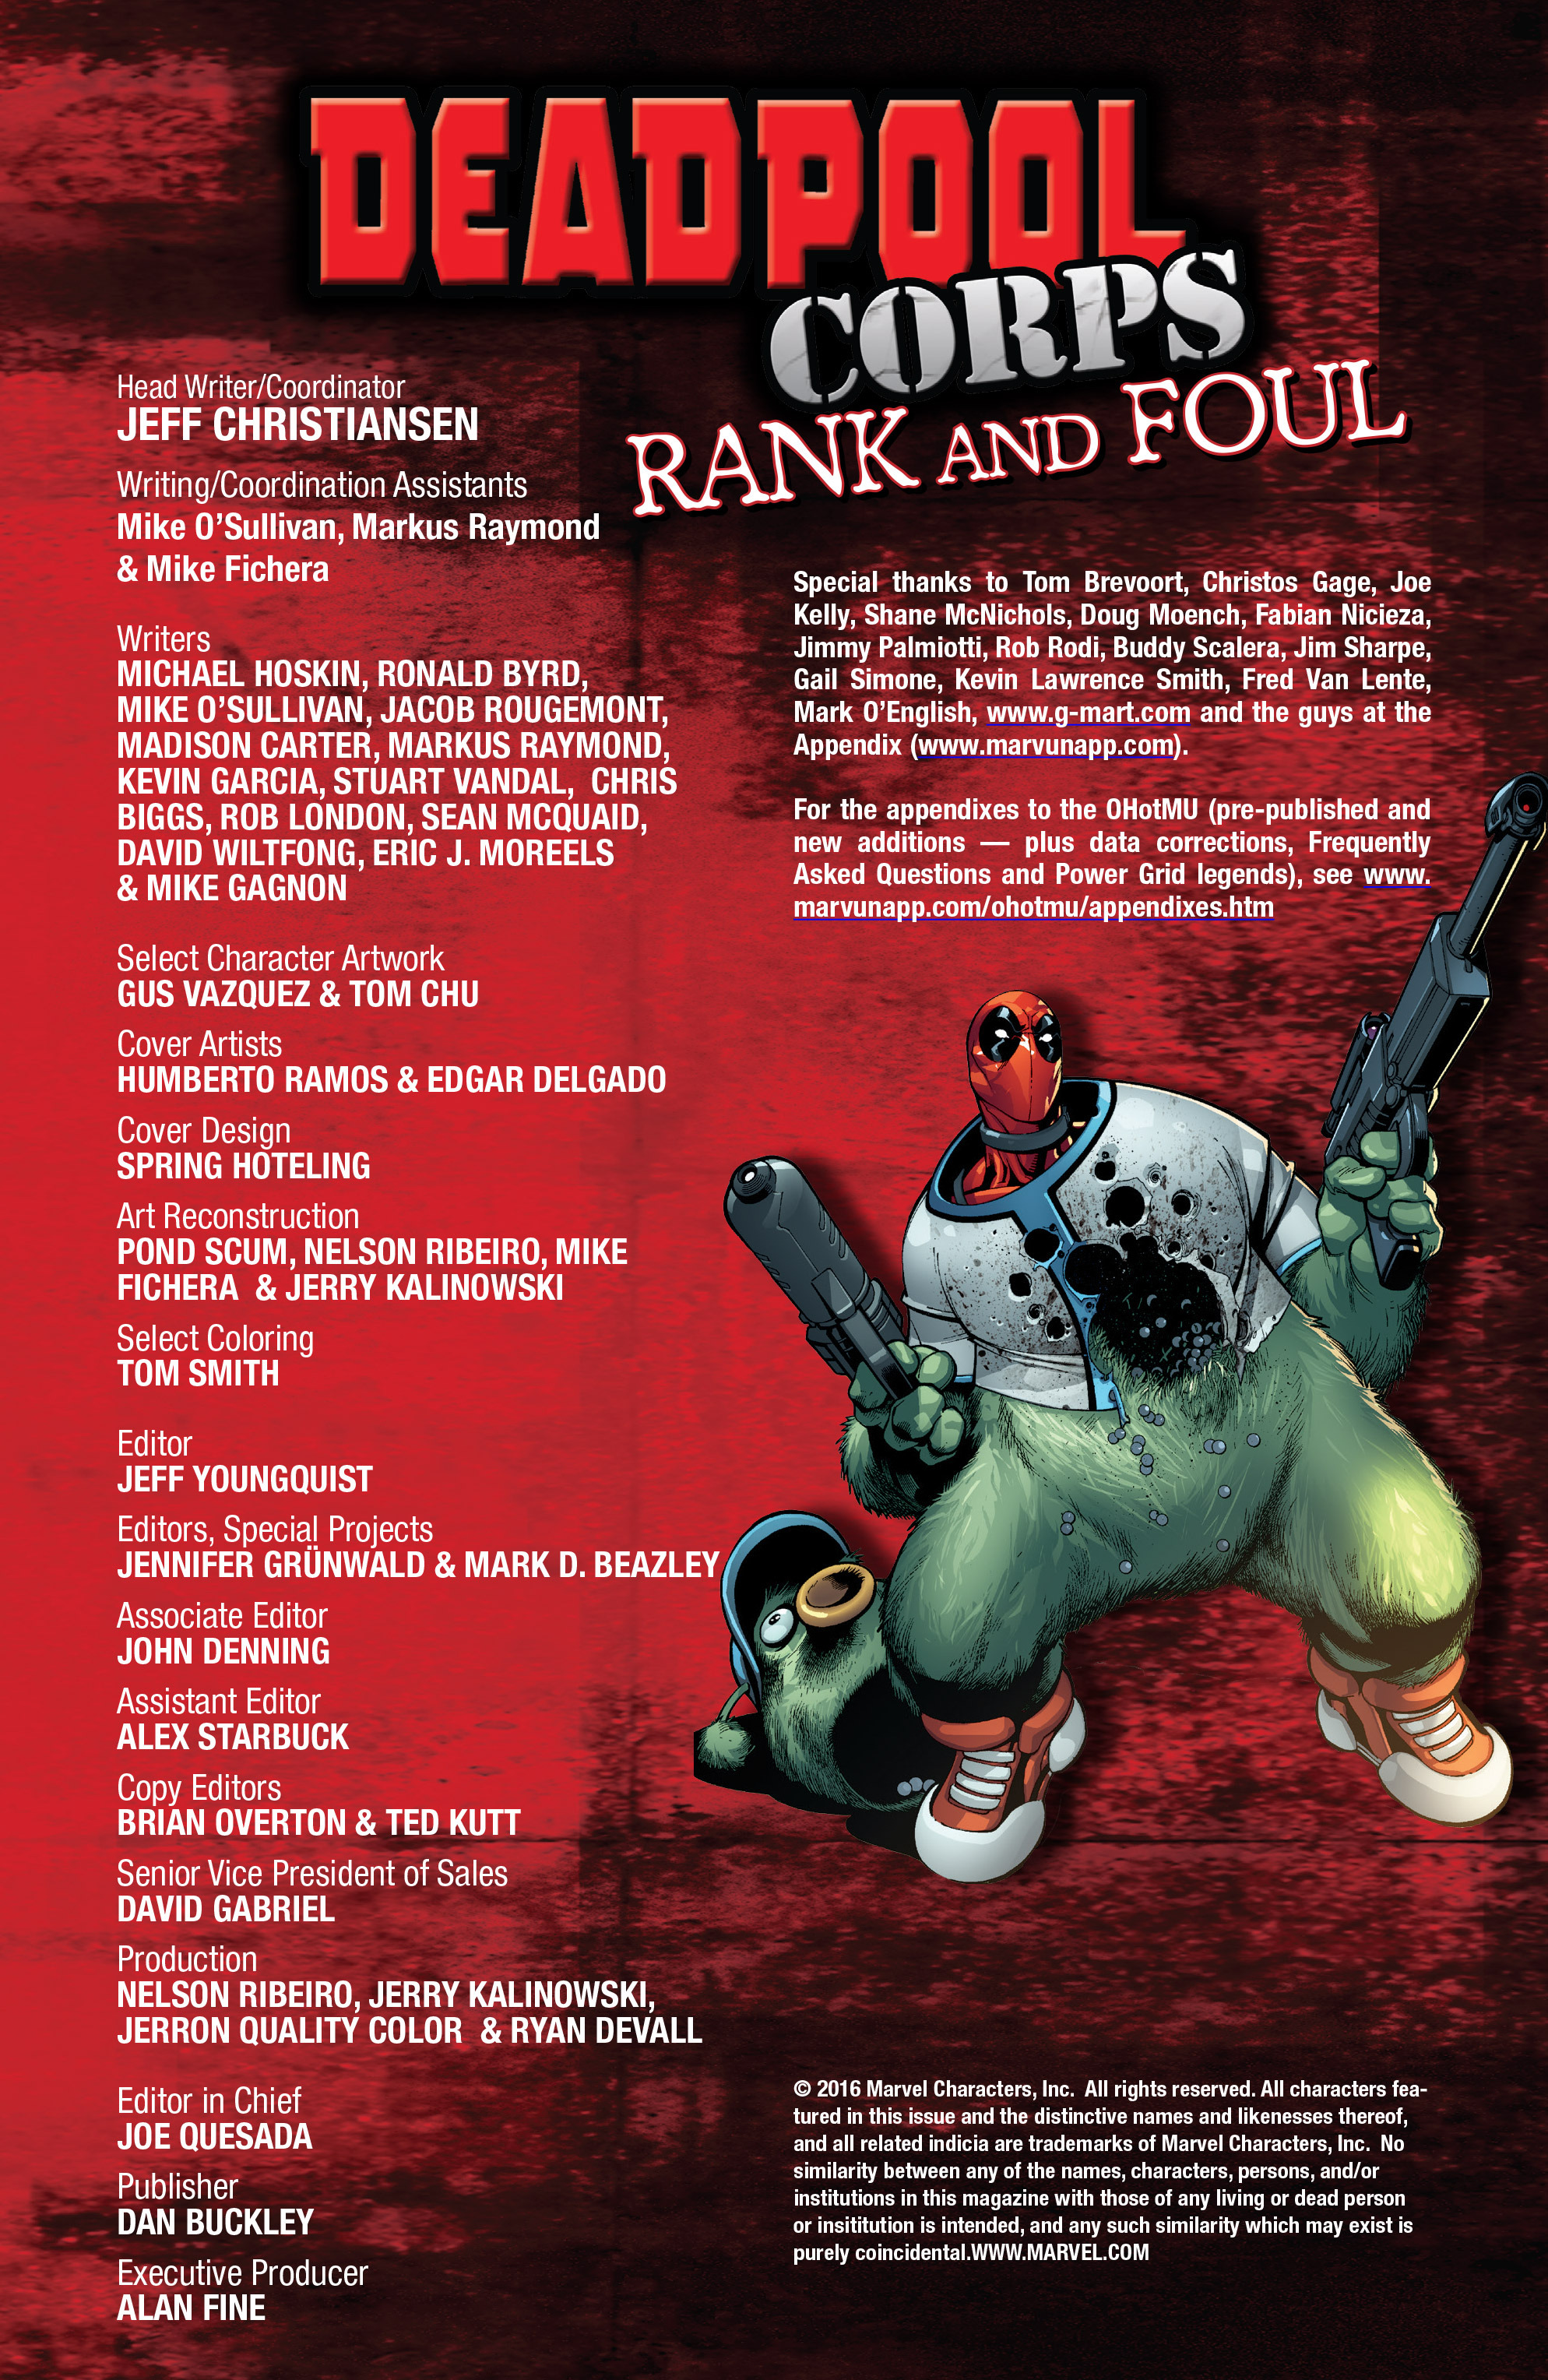 Read online Deadpool Corps: Rank and Foul comic -  Issue # Full - 2